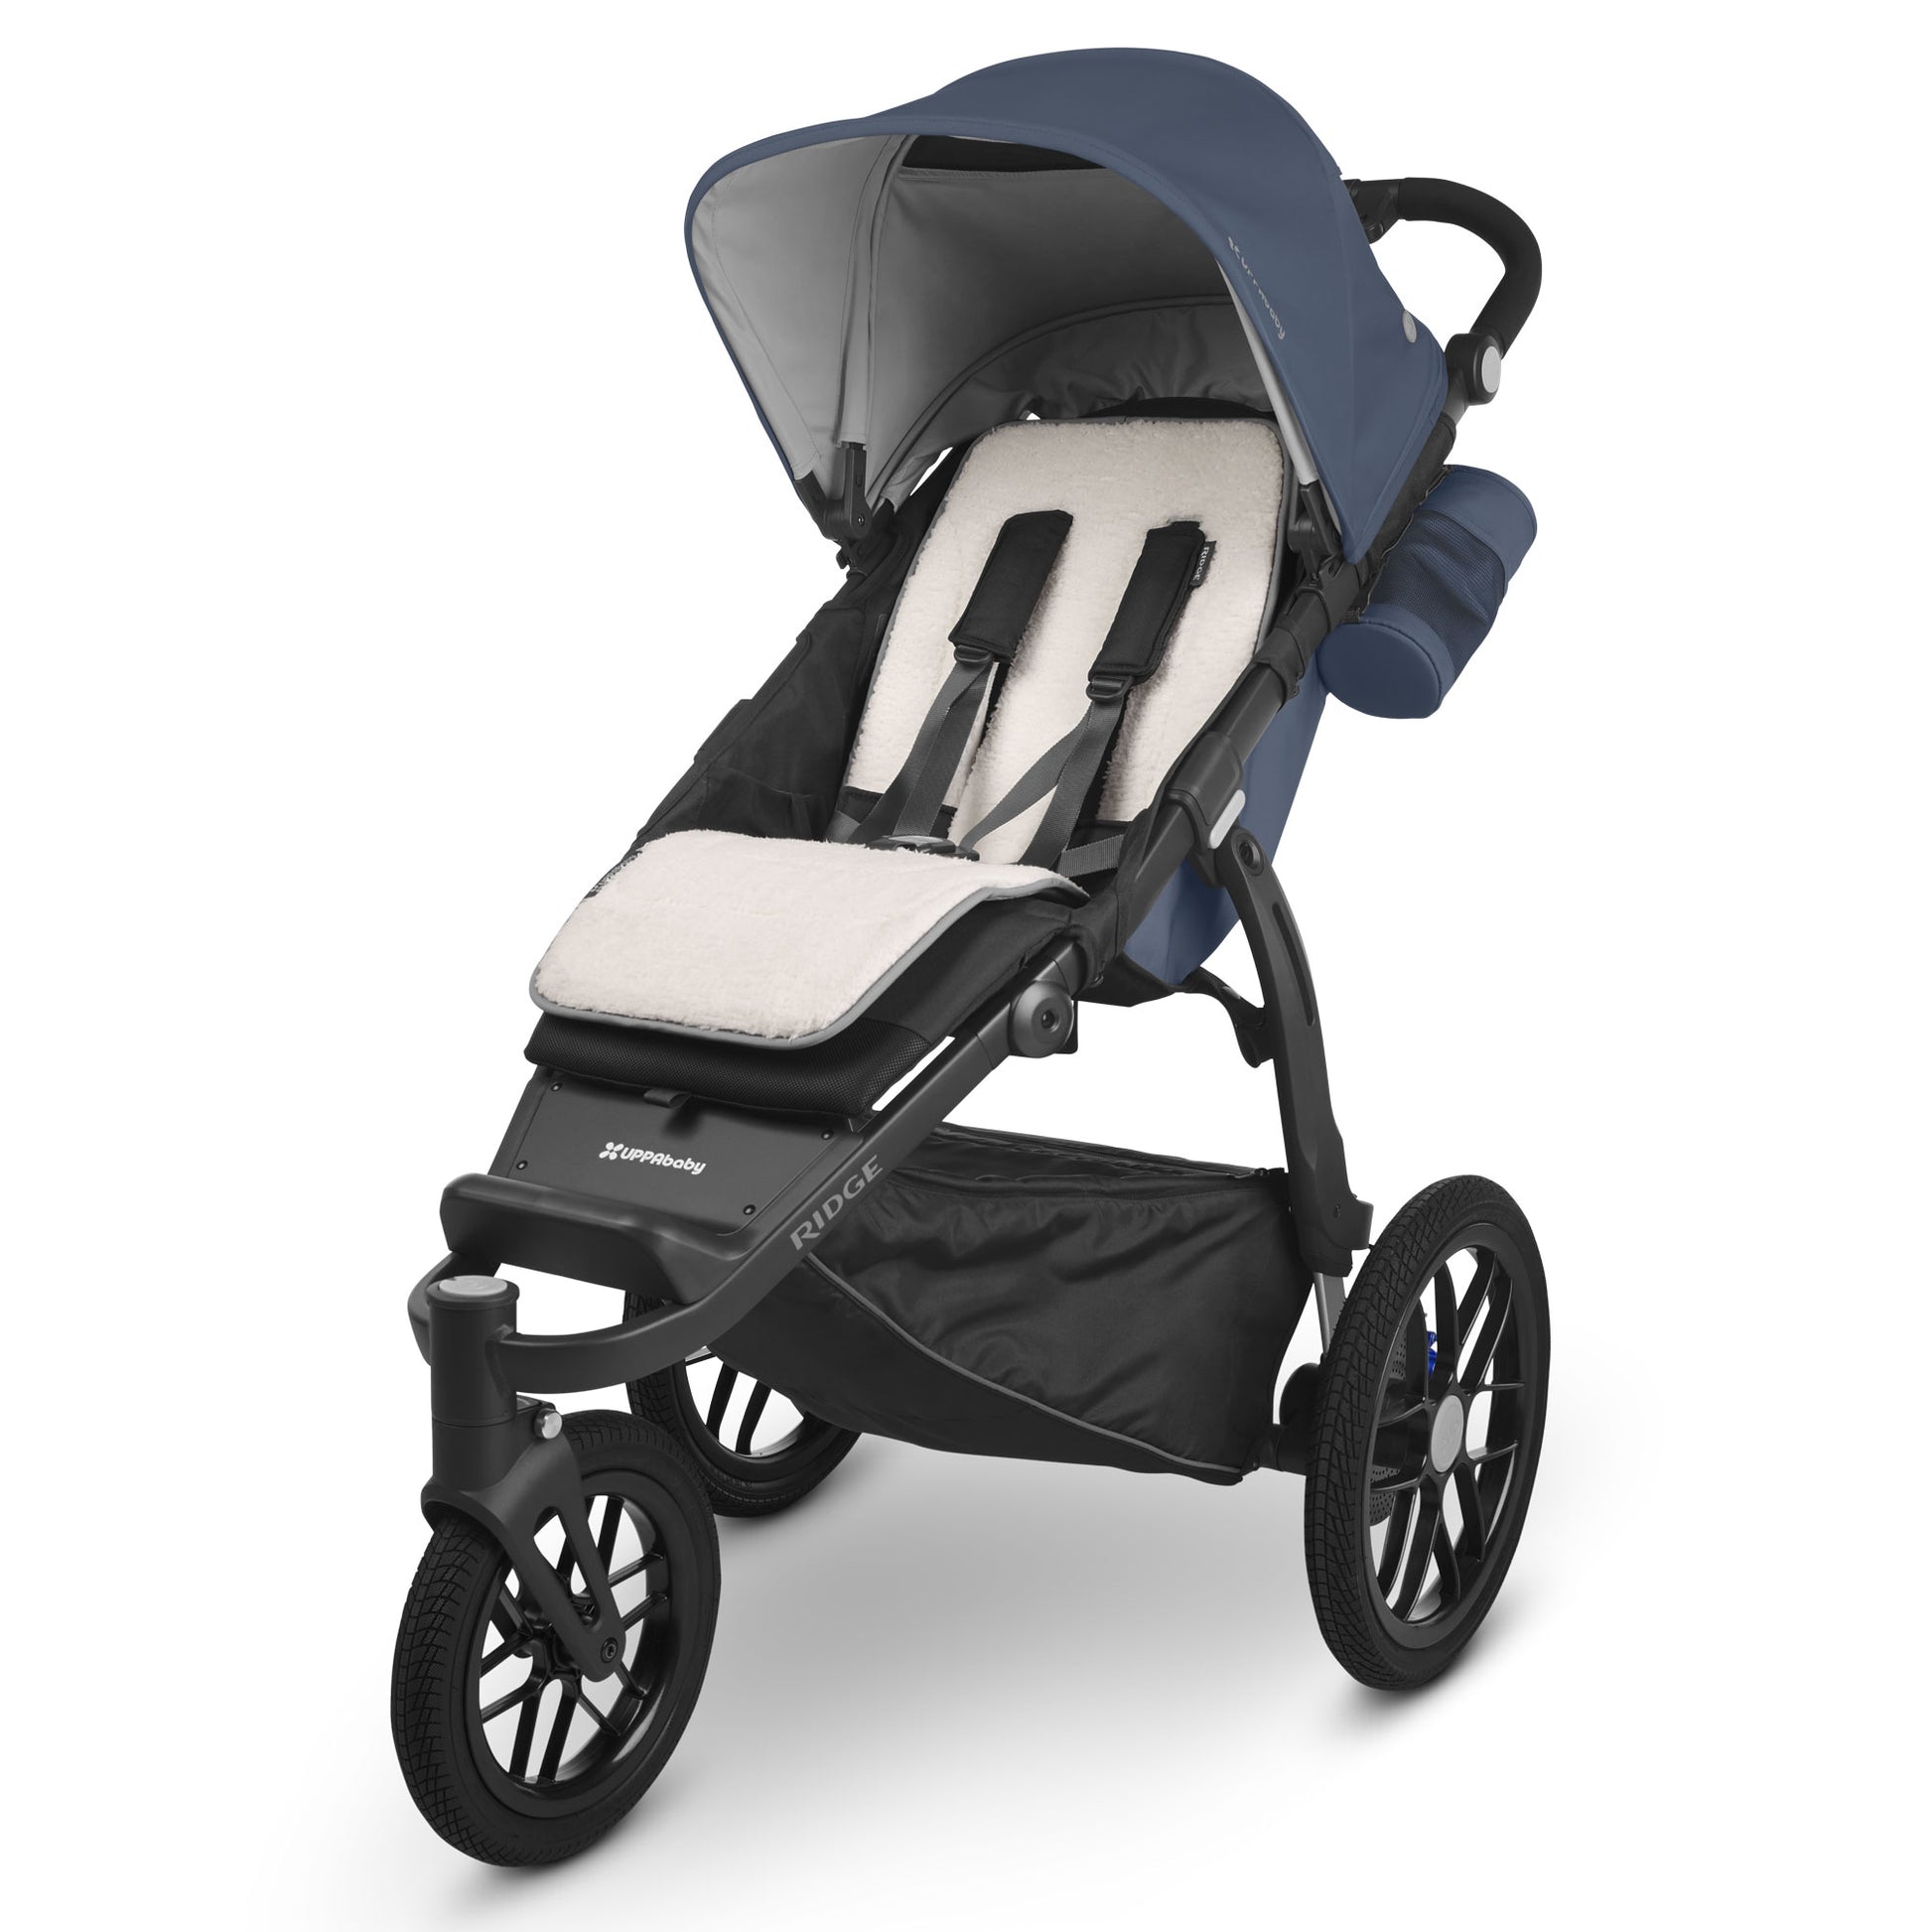 UPPAbaby Reversible Seat Liner - Phoebe Side B on stroller